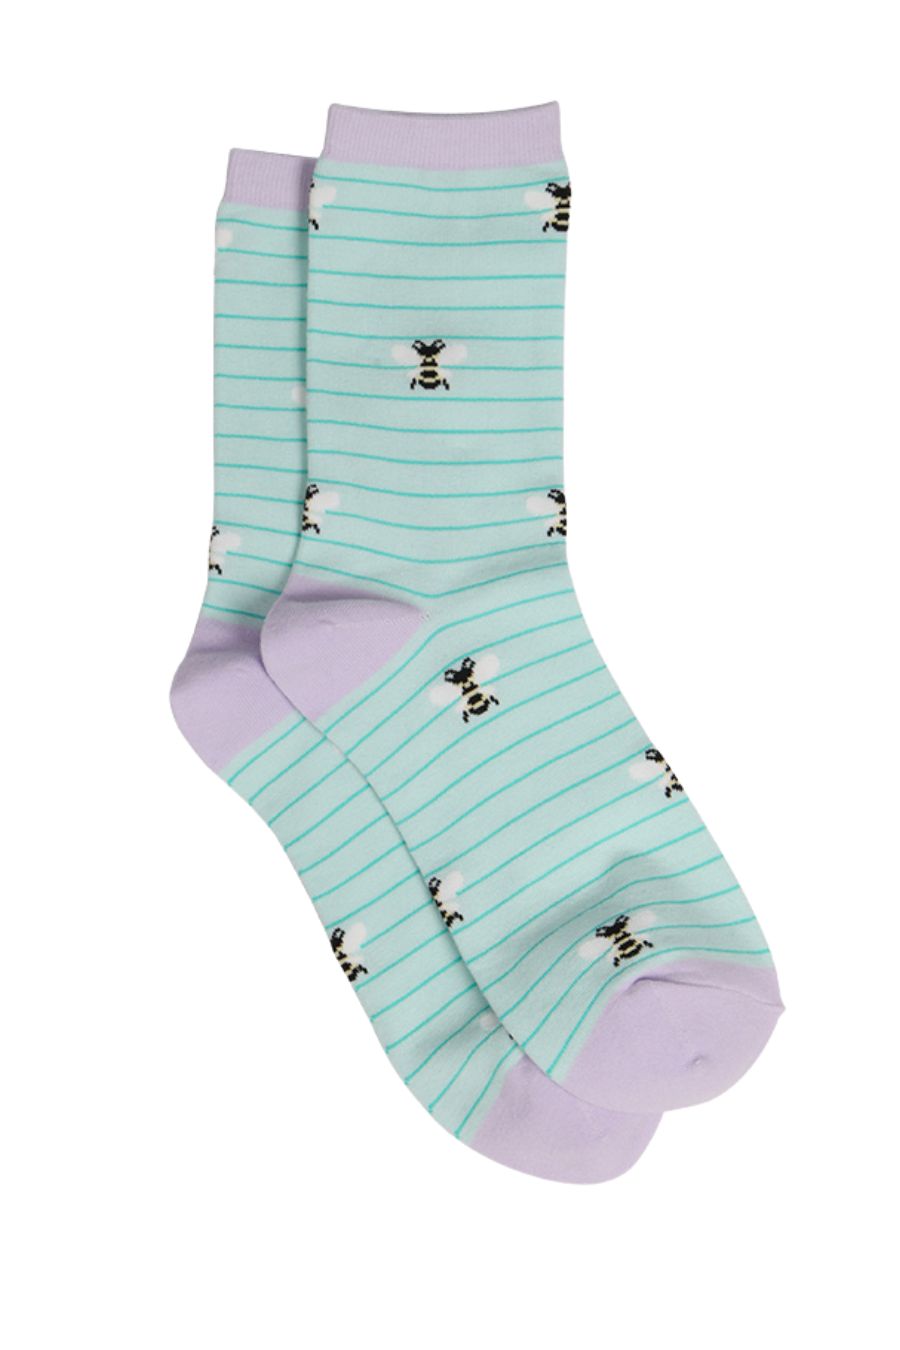 mint green pin striped ankle socks with bumble bees